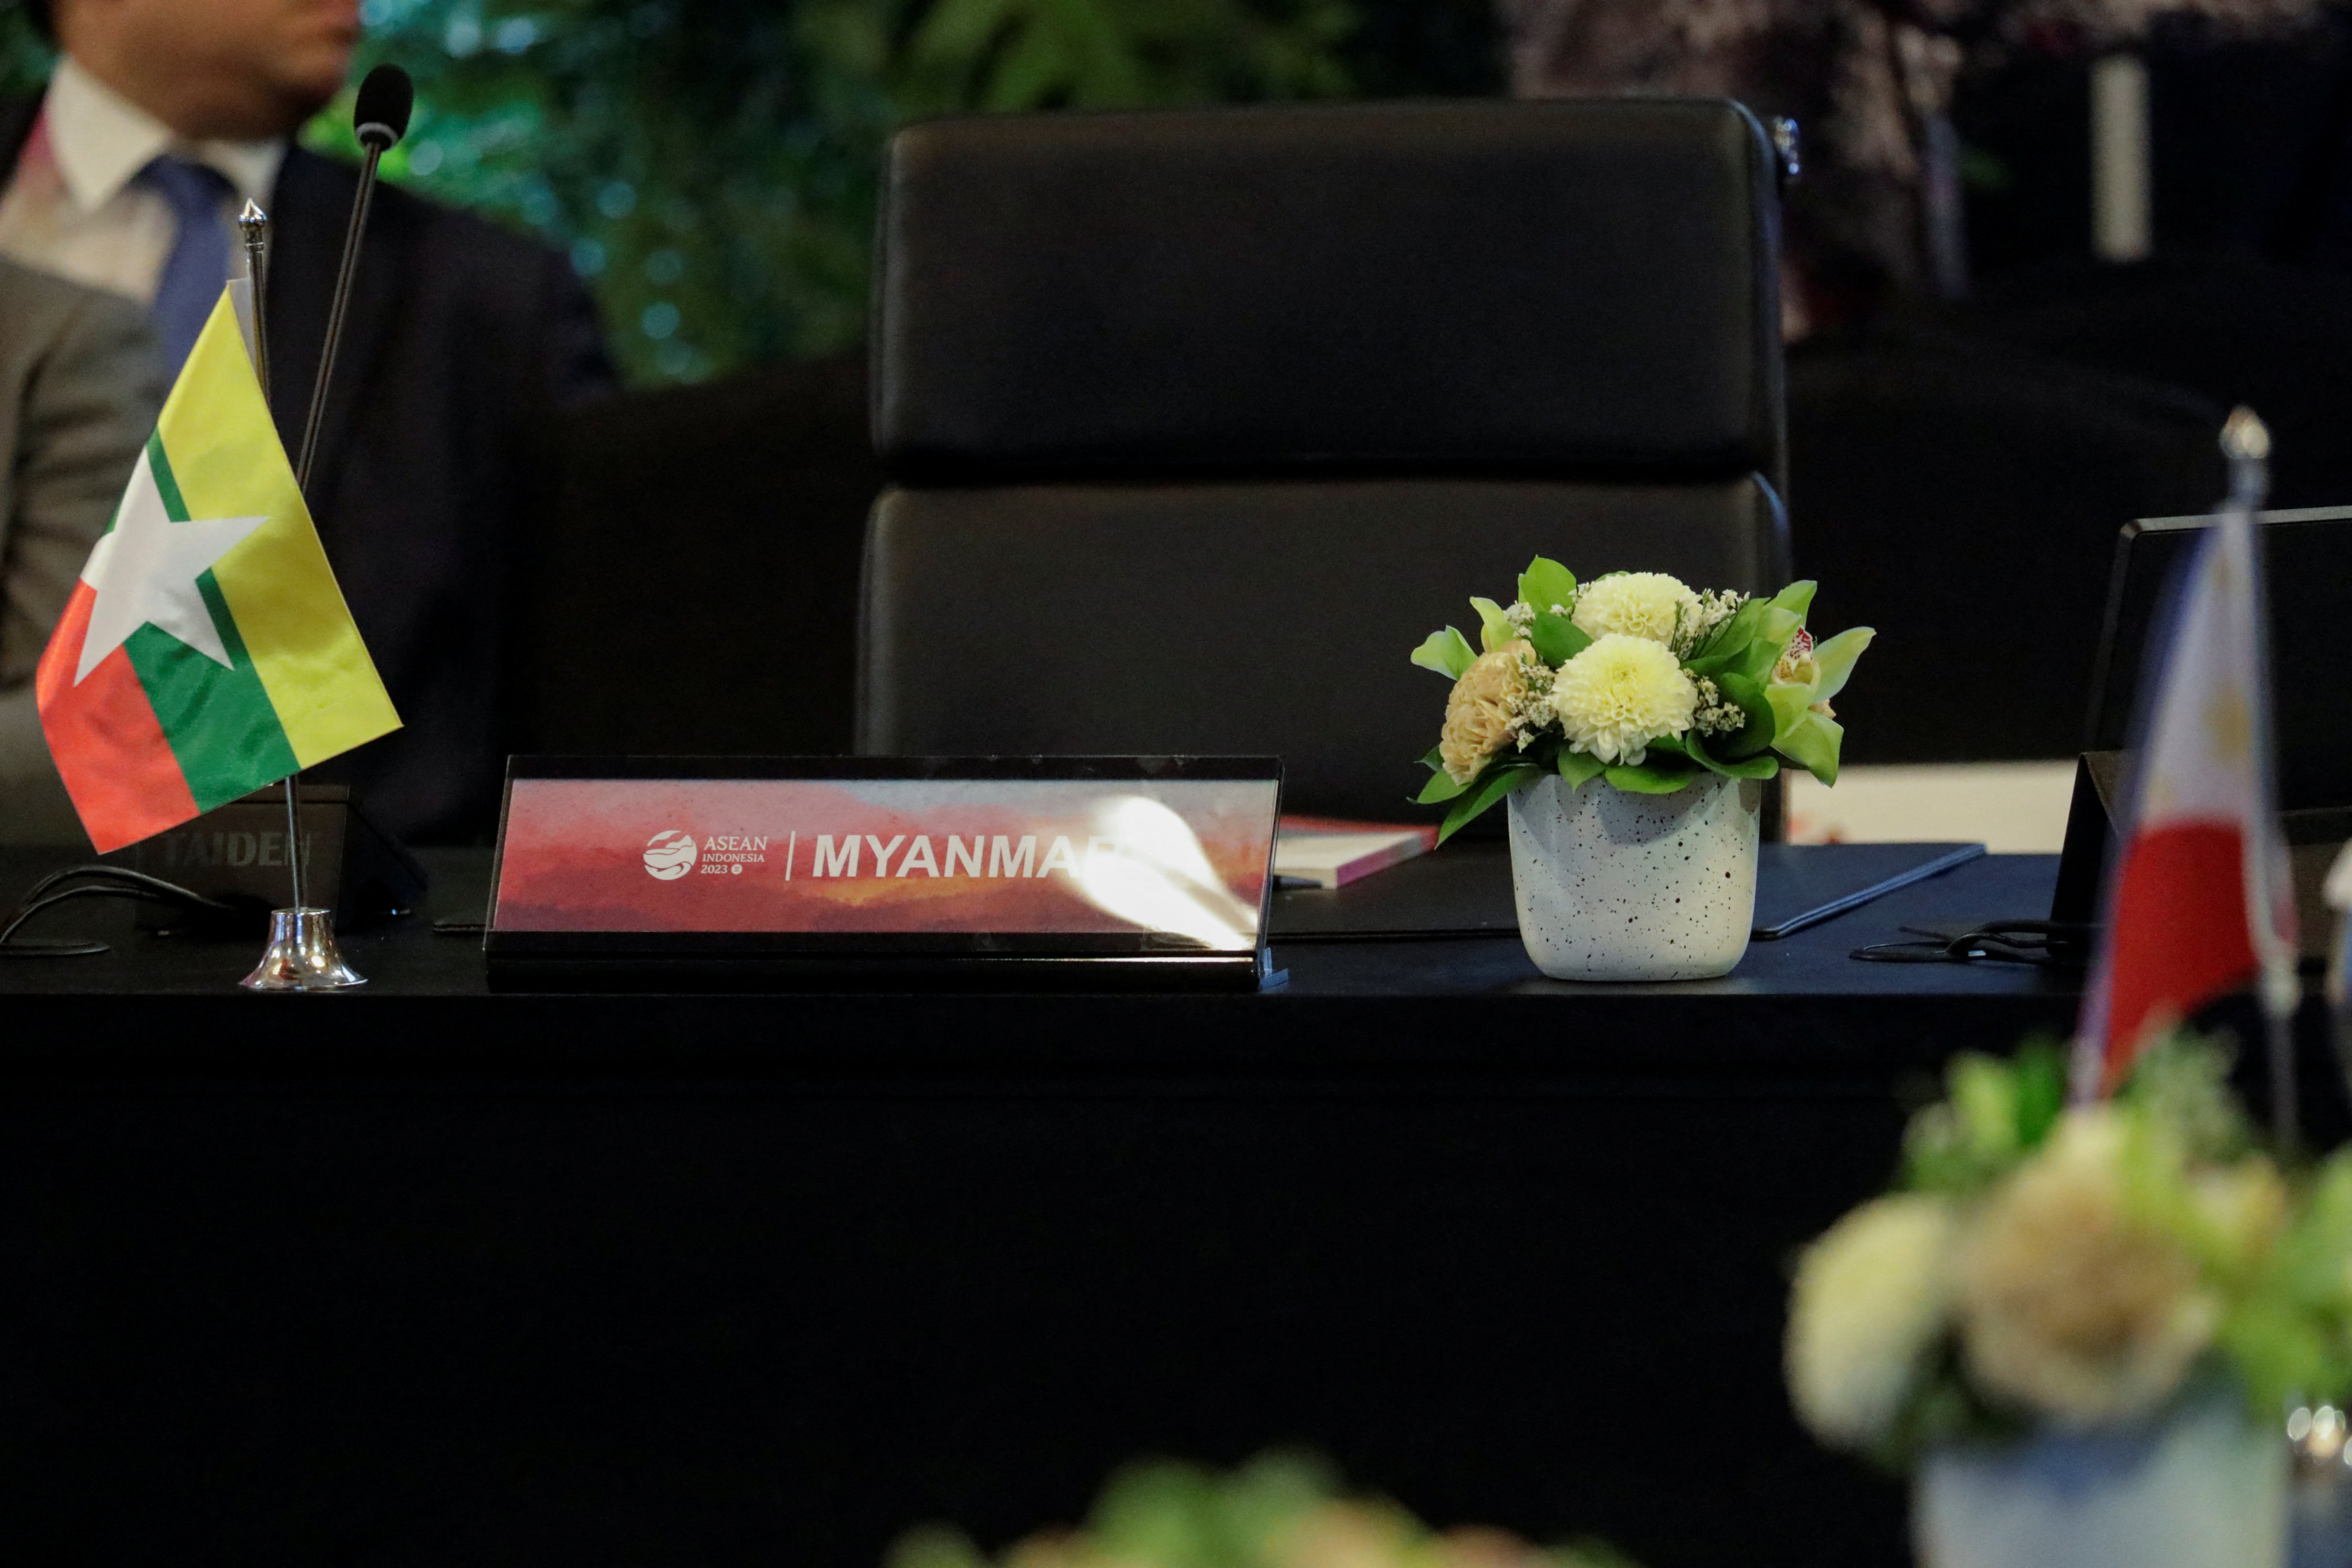 The seat reserved for Myanmar is left empty during sessions of the Asean foreign ministers’ meeting in Jakarta on July 11. Divisions within Asean over how to deal with the violence in Myanmar and territorial disputes in the South China Sea pose a threat to unity within the bloc. Photo: Reuters